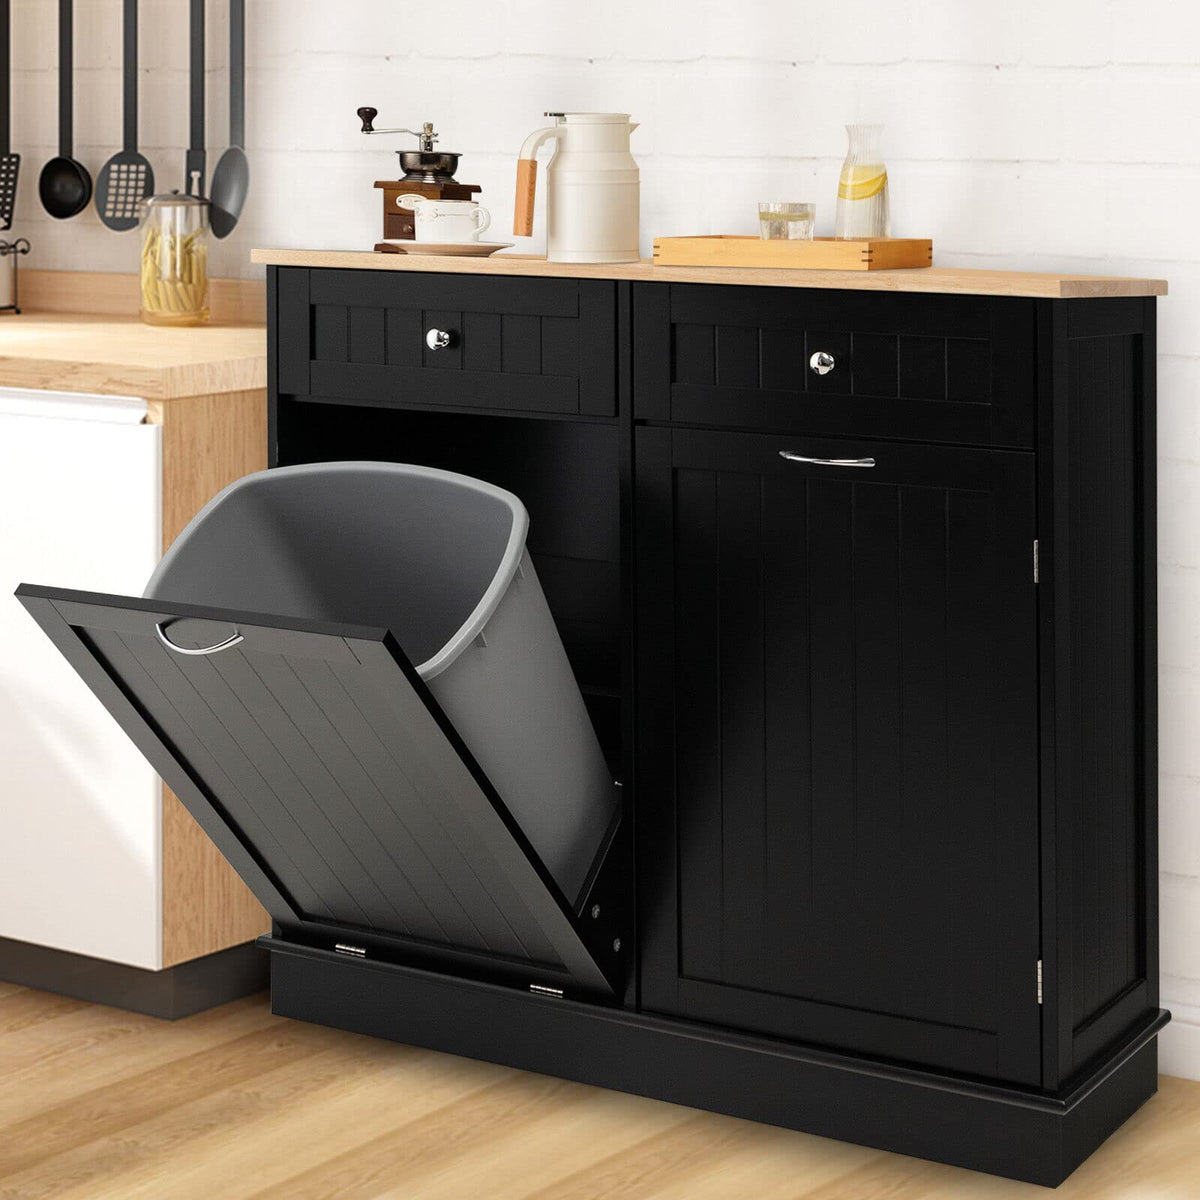 Tilt Out Trash Bin Cabinet with 2 Drawers & Bamboo Cutting Board